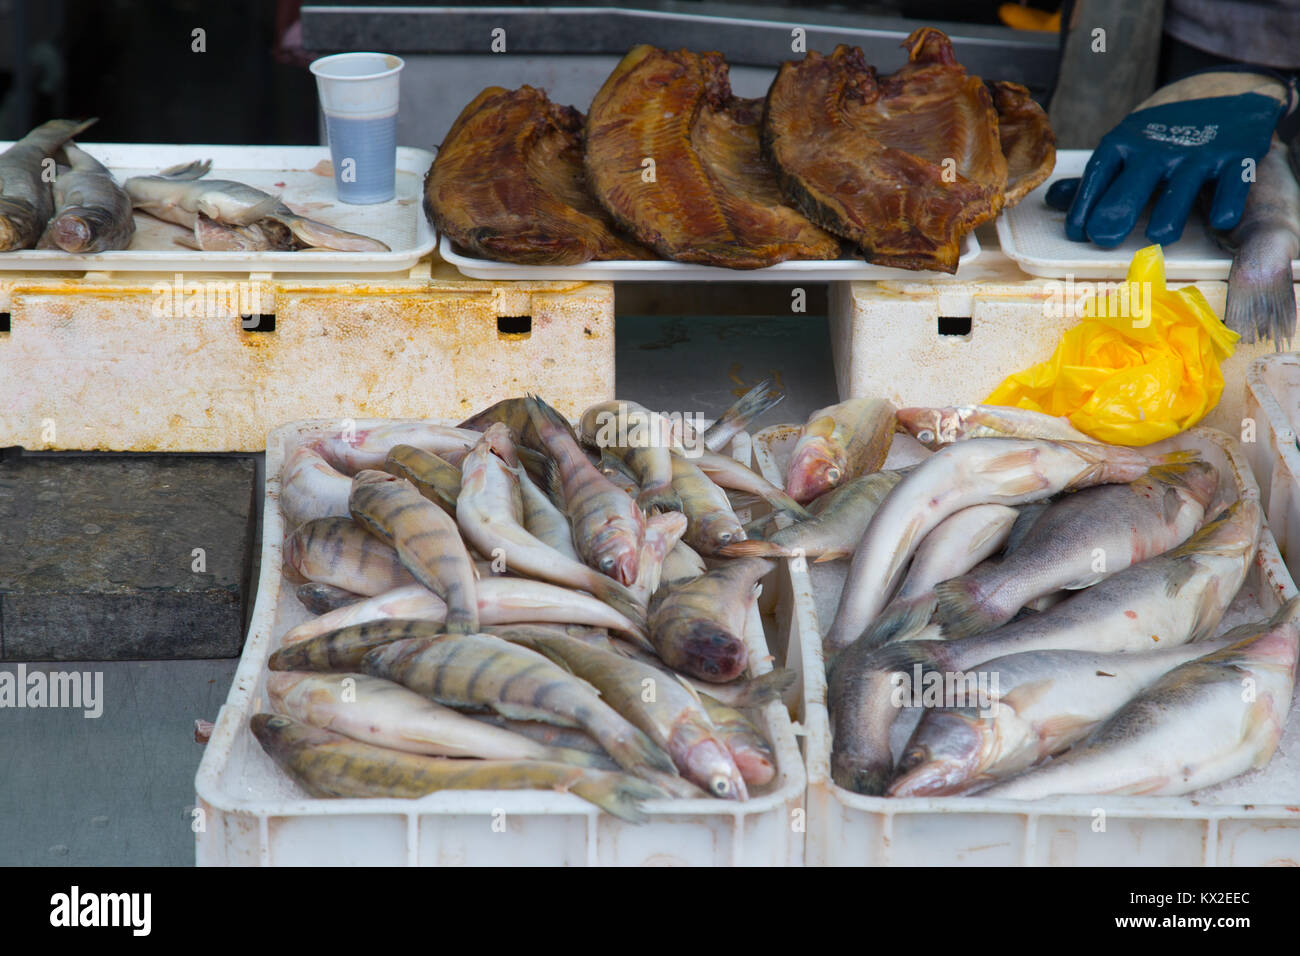 Fresh pike perch / zander fish coming from Danube River being sold at a market in Zemun, Belgrade, Serbia Stock Photo